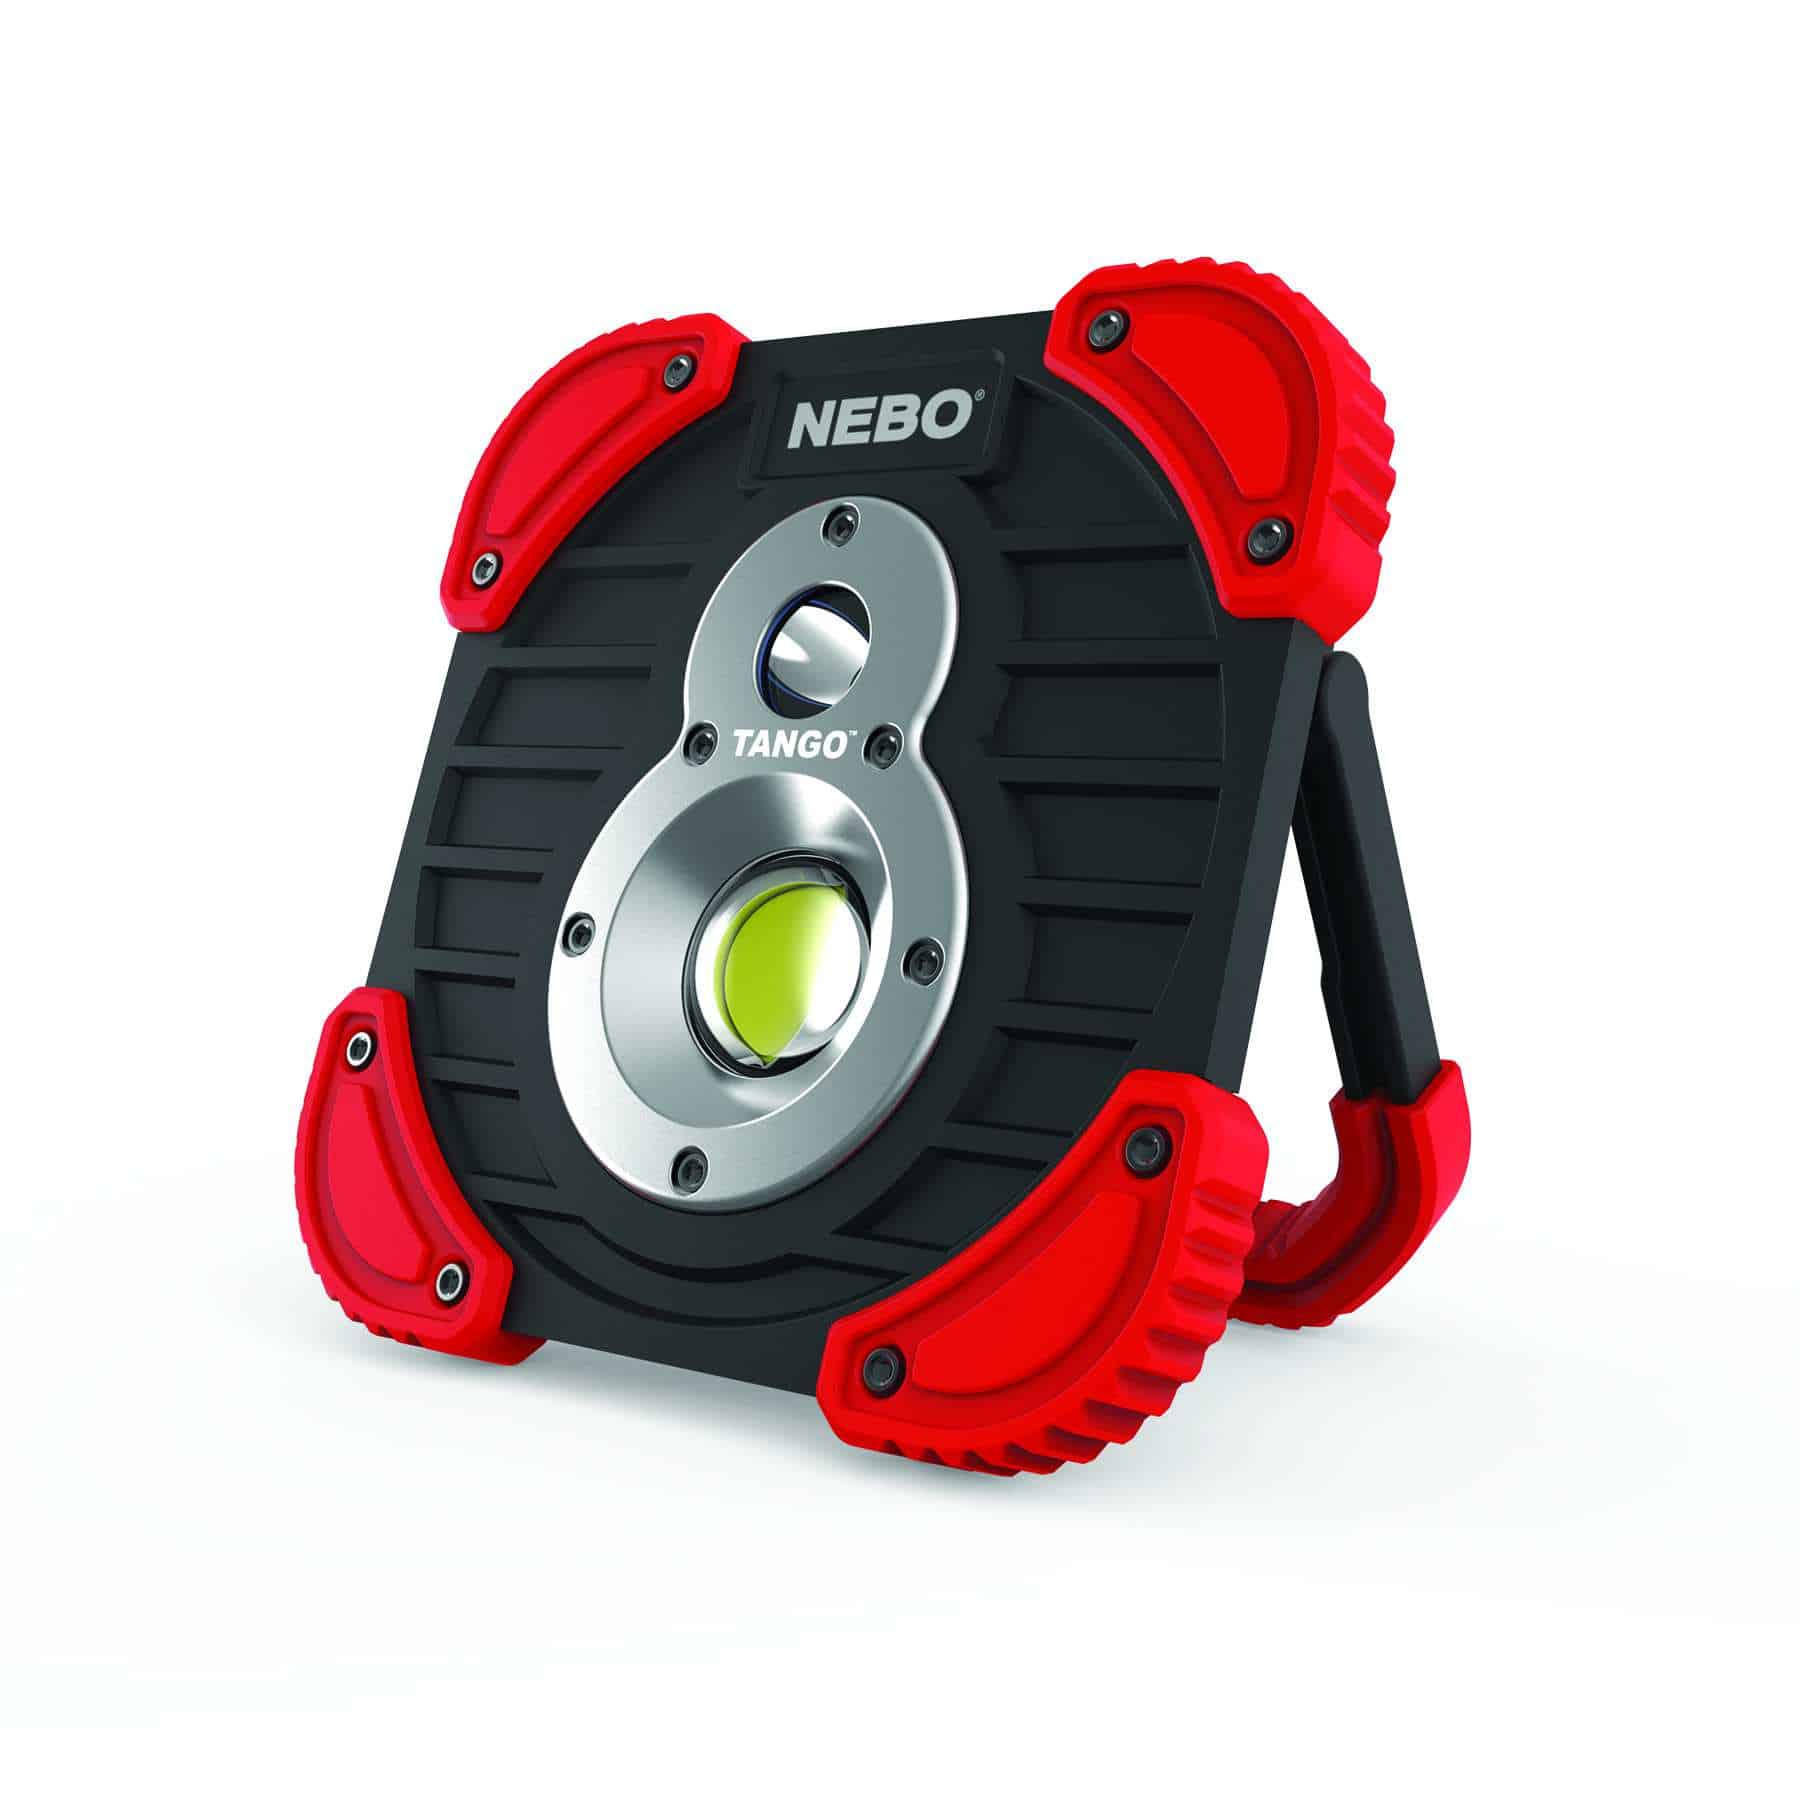 Work Light Rechargeable USB Charger NEBO Tango